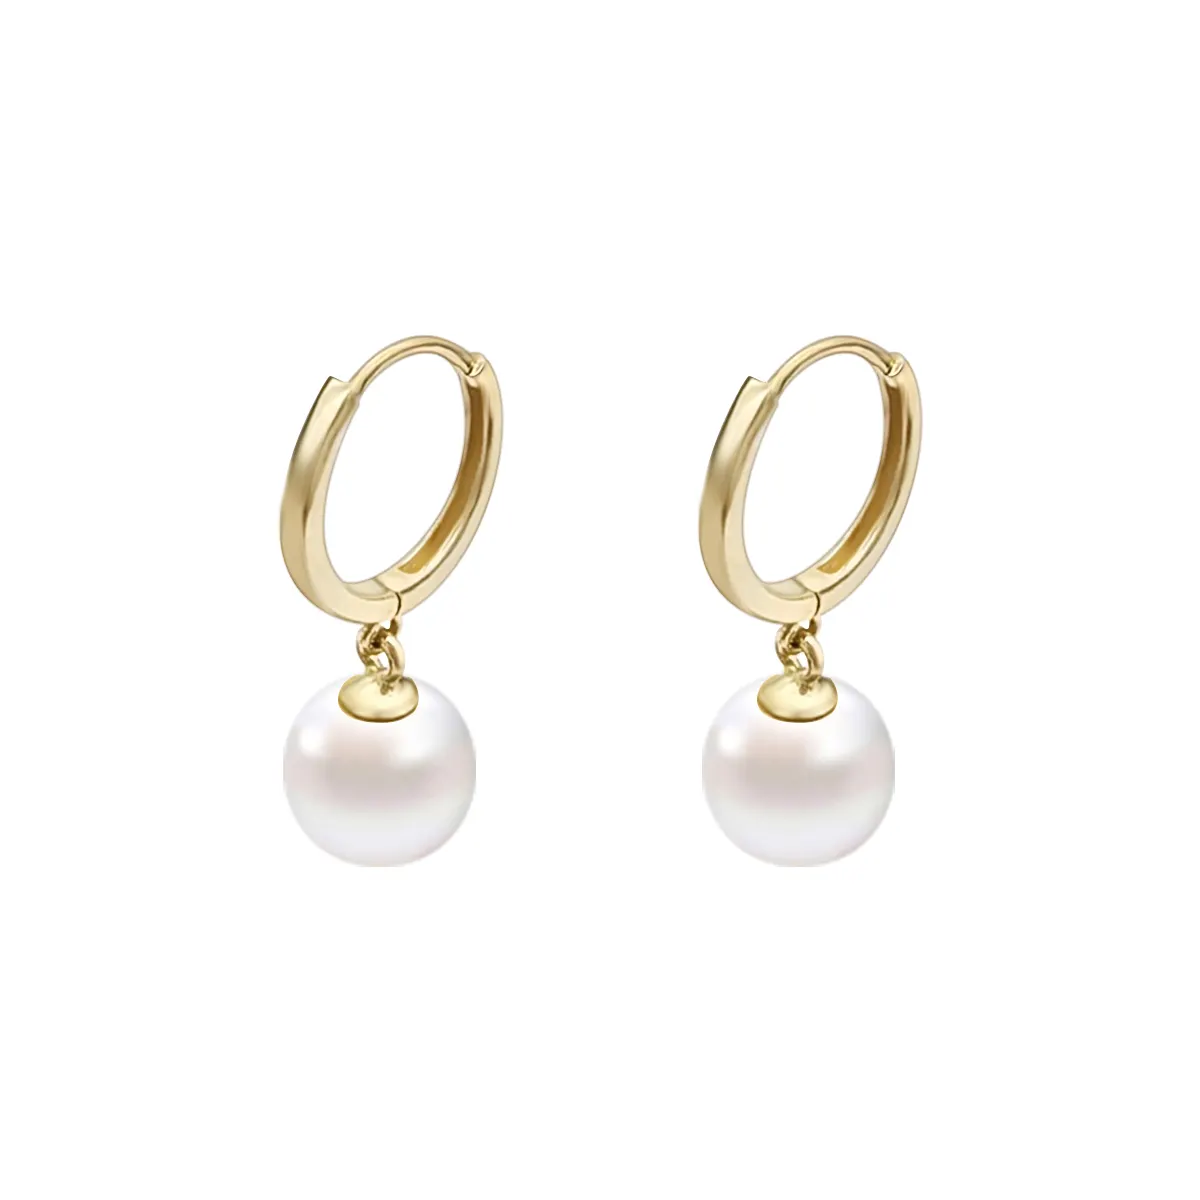 New Arrival Luxury 14K Solid Gold Huggie Earrings Hoop with 8mm Freshwater Pearl Jewelry for Women Gifts